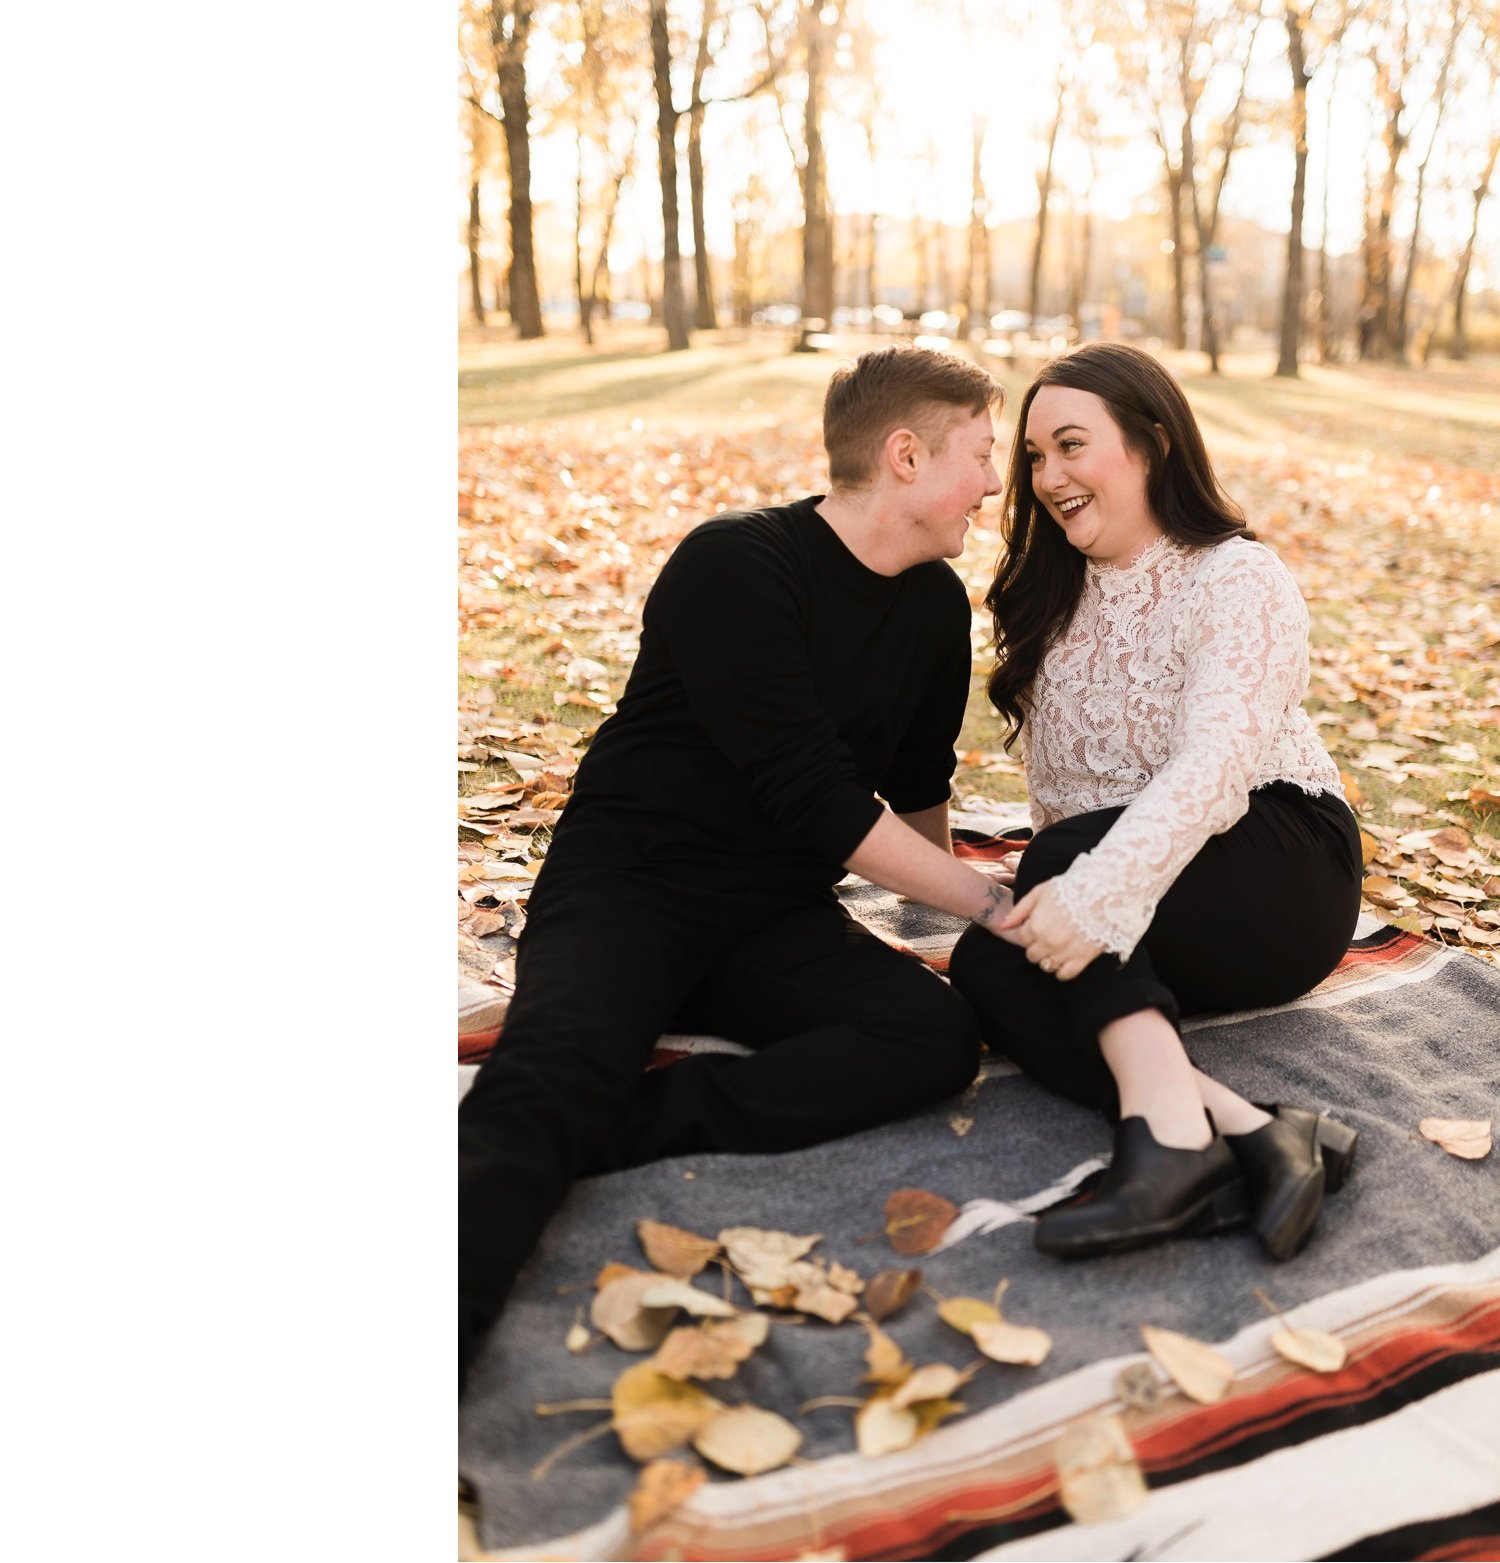 09_2018 29377_sunlight_landscape_trees_couple_engagement_close_Calgary_cuddle_kiss_simple_golden_hour_intimate_nature_autumn_soft_fiancee_delicate_bride_Alberta_photographer_forest_groom_outdoor.jpg